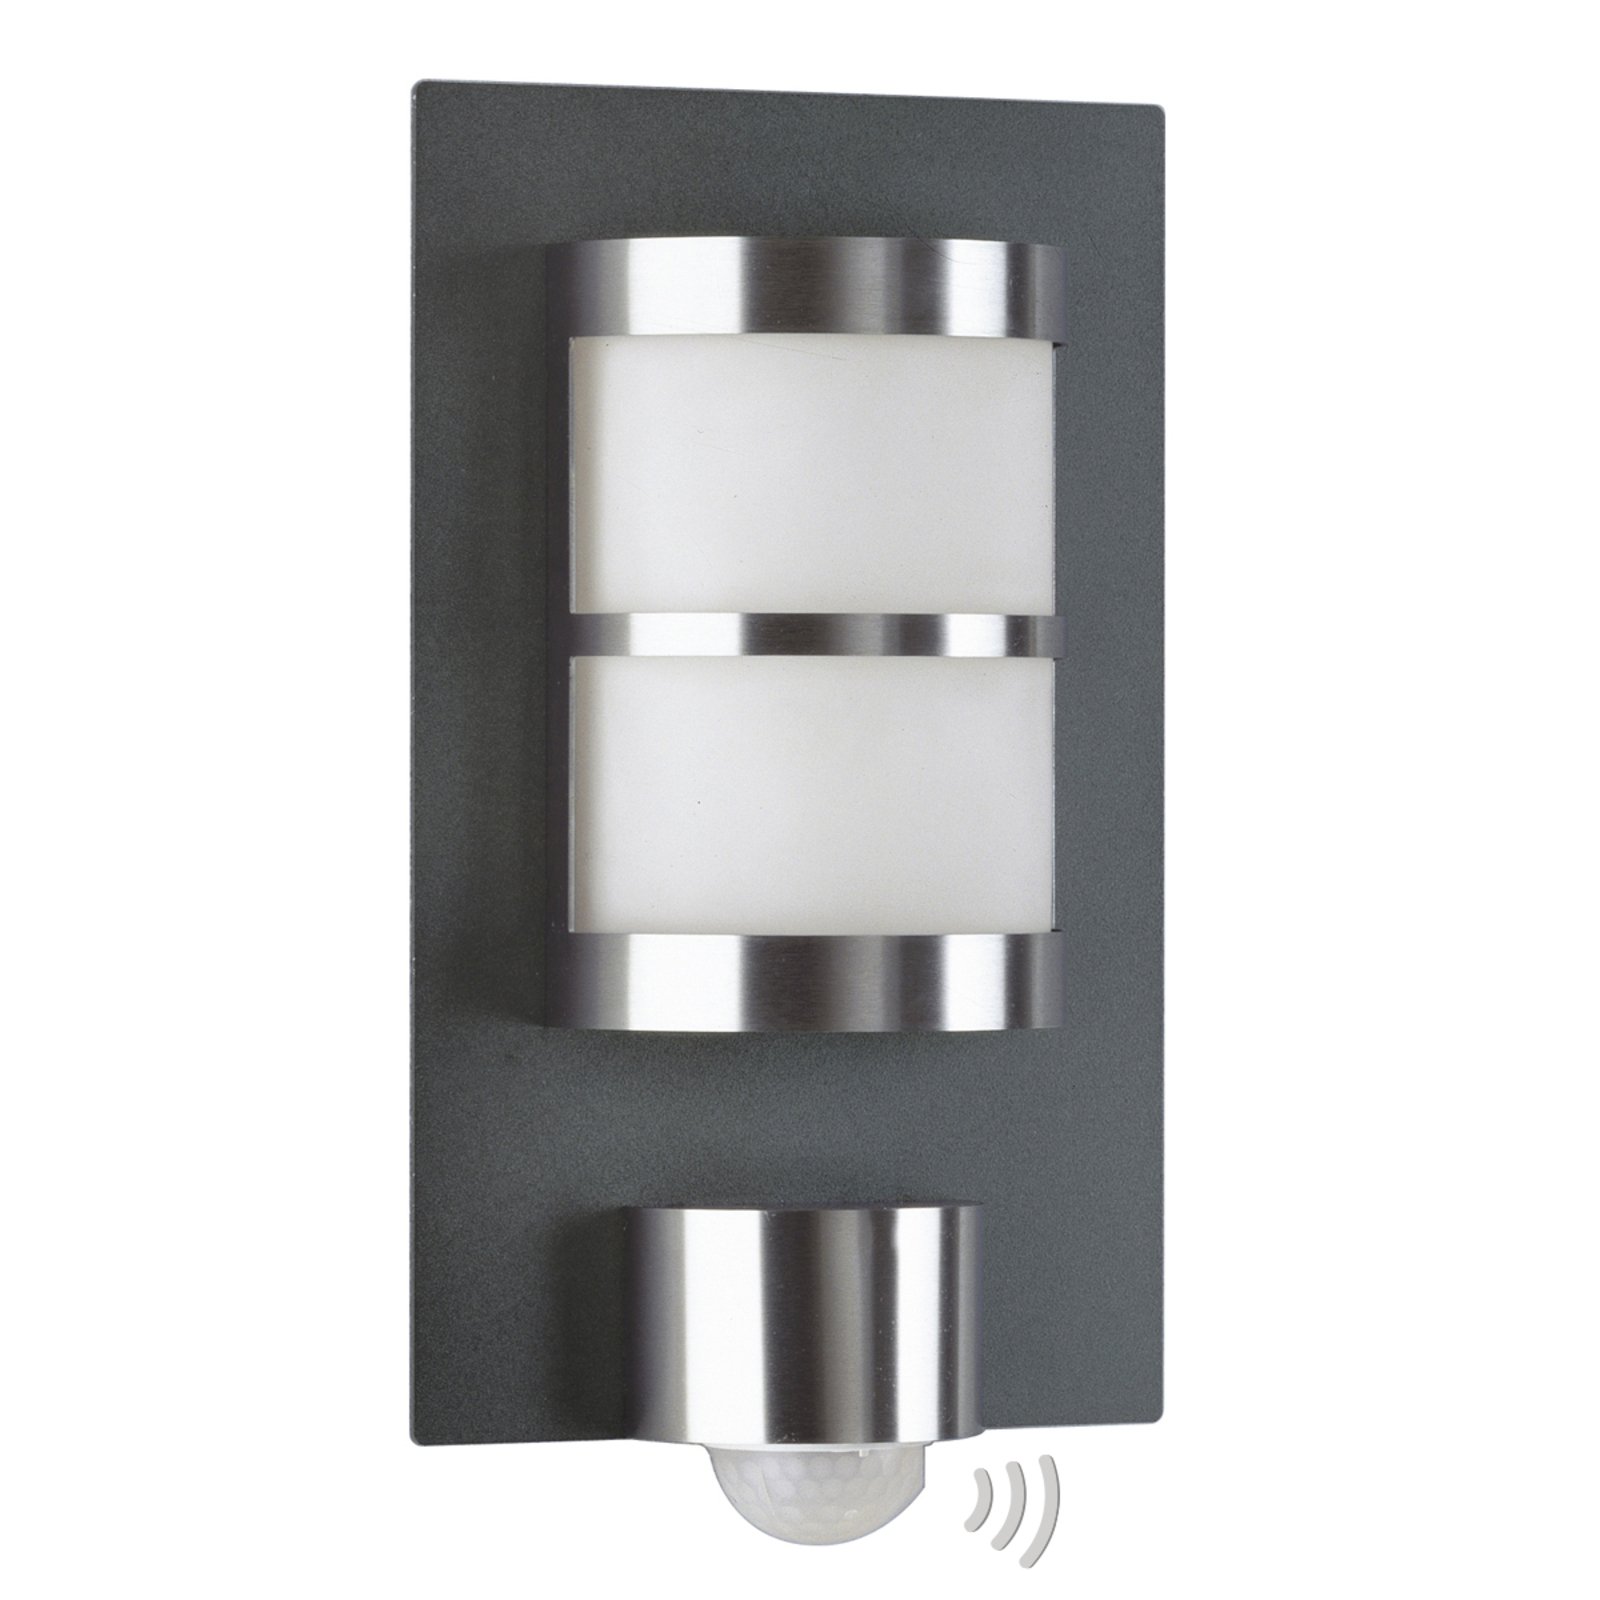 Adonia outdoor wall light with motion detector